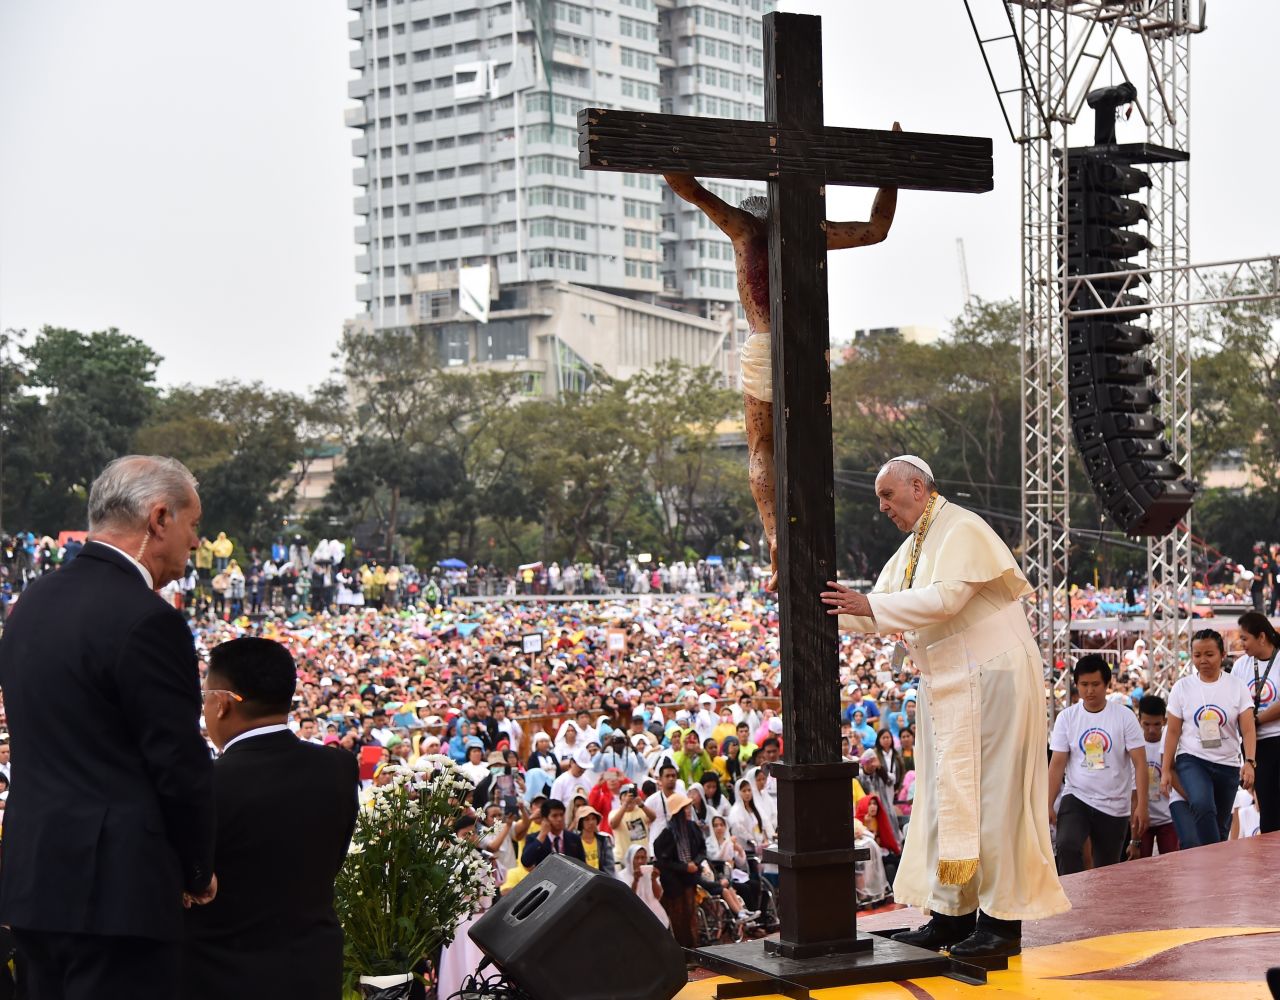 The Pope prays in front of a cross during his visit to the University of Santo Tomas in Manila on January 18. 